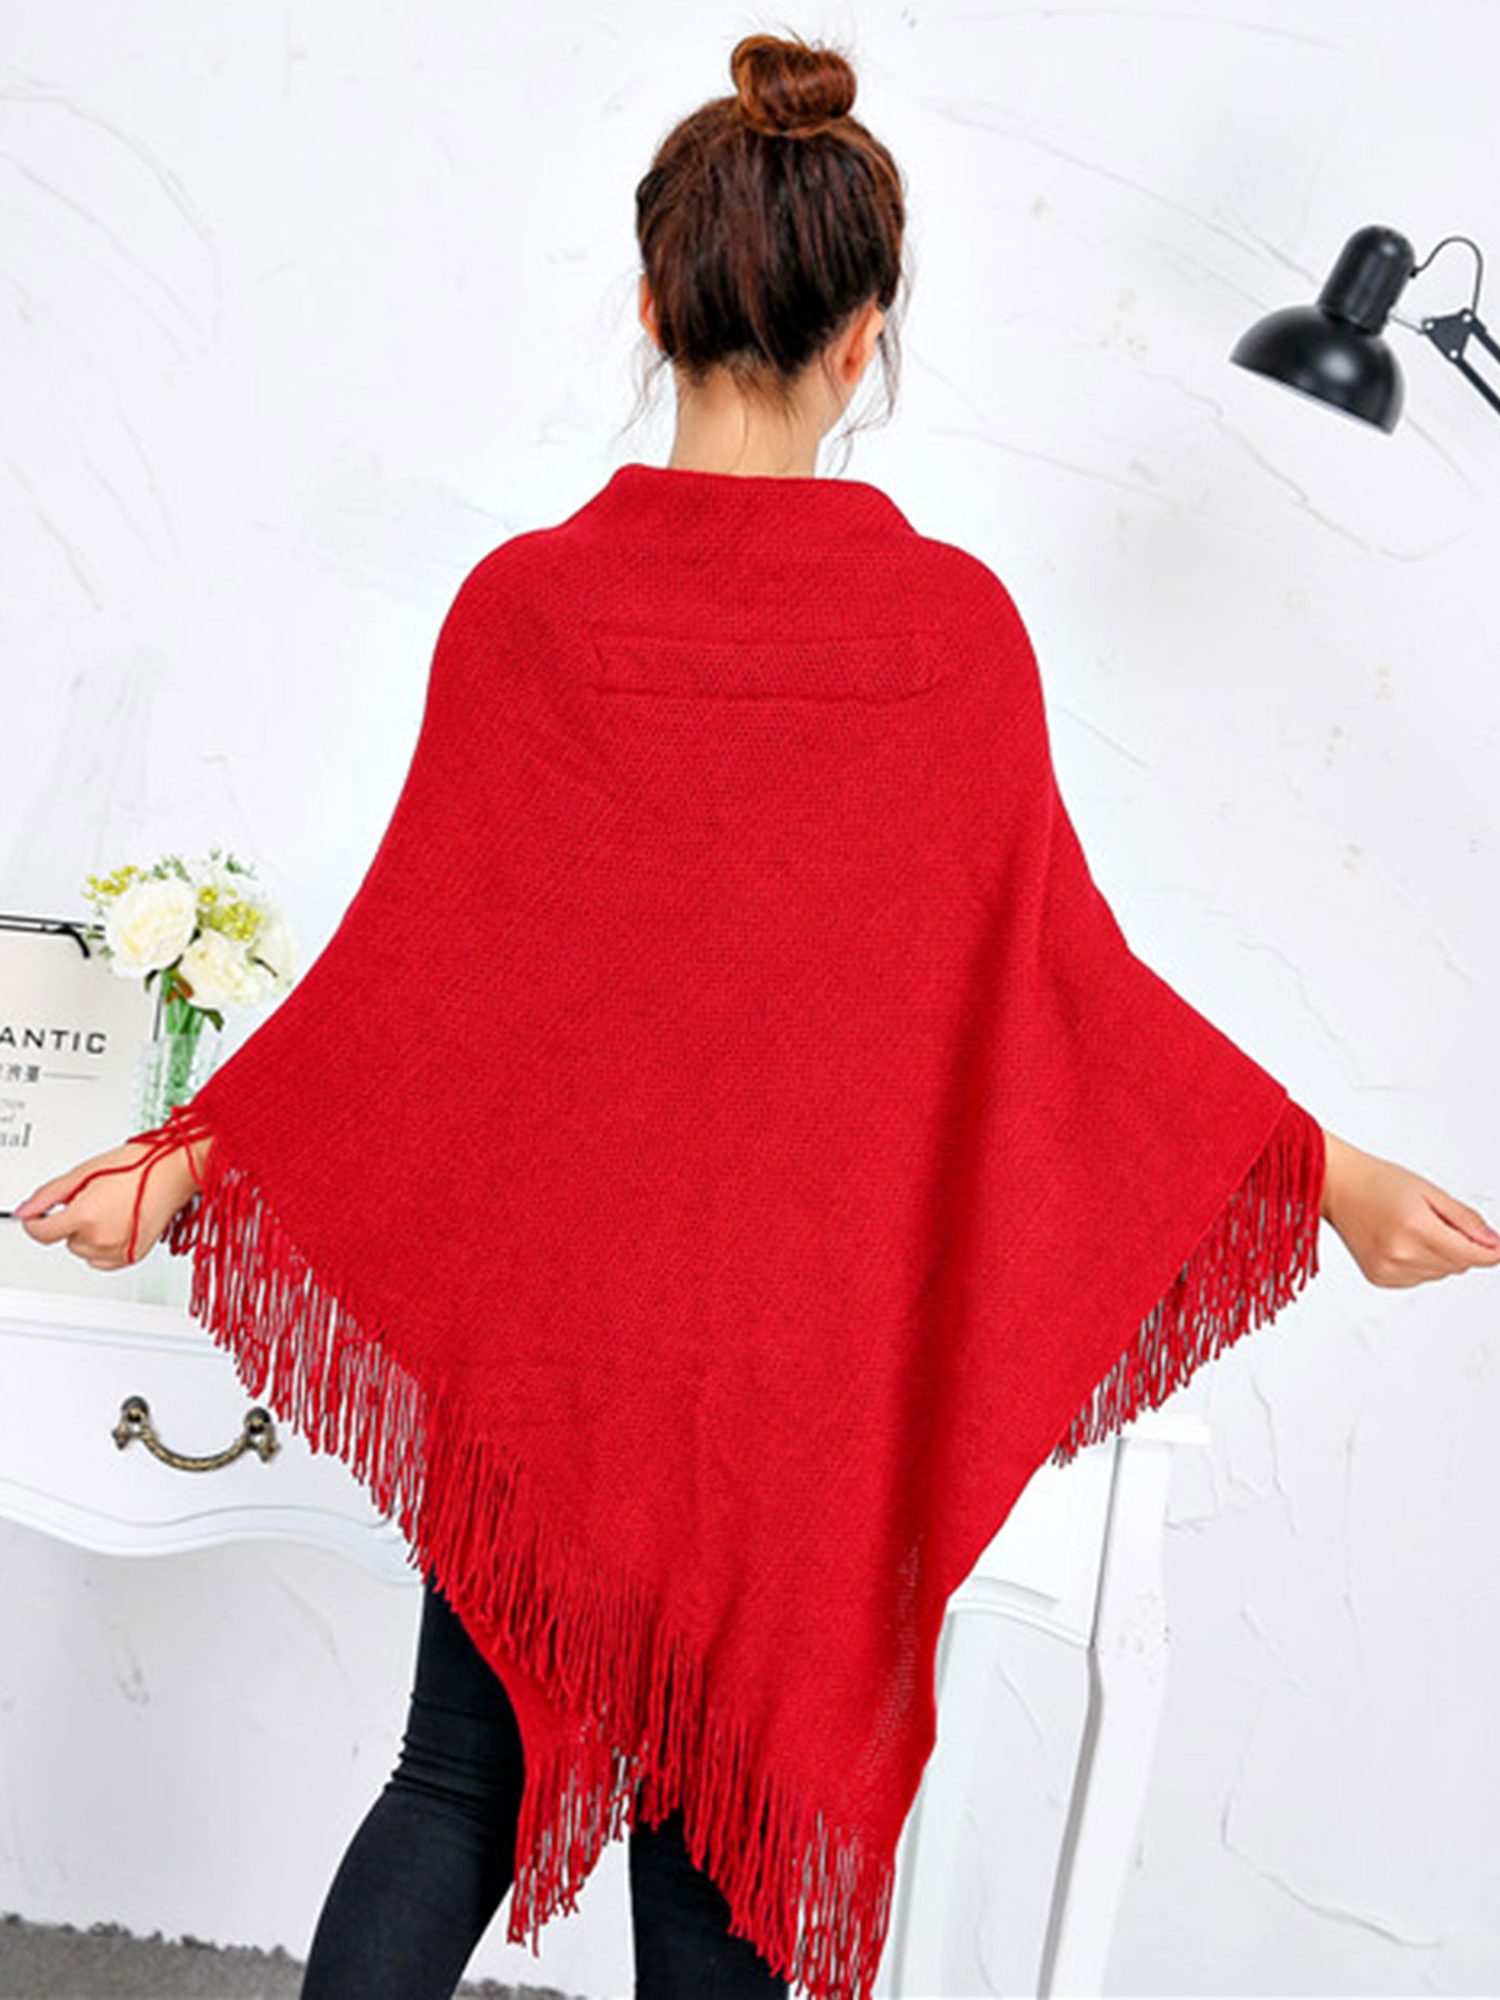 Poncho Sweater Women Oversized Horn Buttons Knit Poncho Cape Coat Cardigan Shawl Tassel Wrap Sweater for Women - image 4 of 7